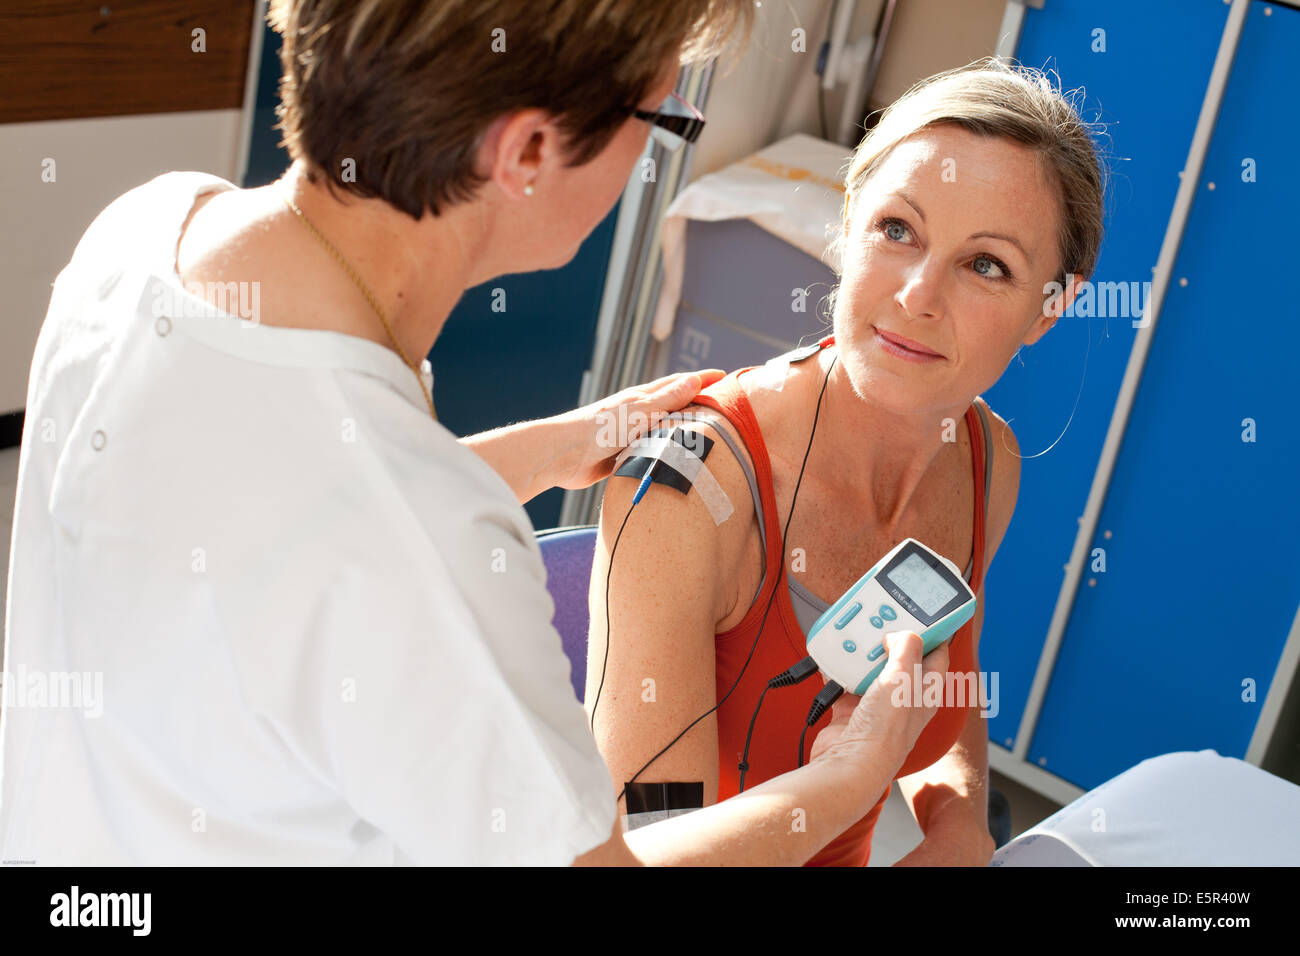 Transcutaneous Electrical Nerve Stimulation (TENS) Therapy, Limoges hospital, France. Stock Photo